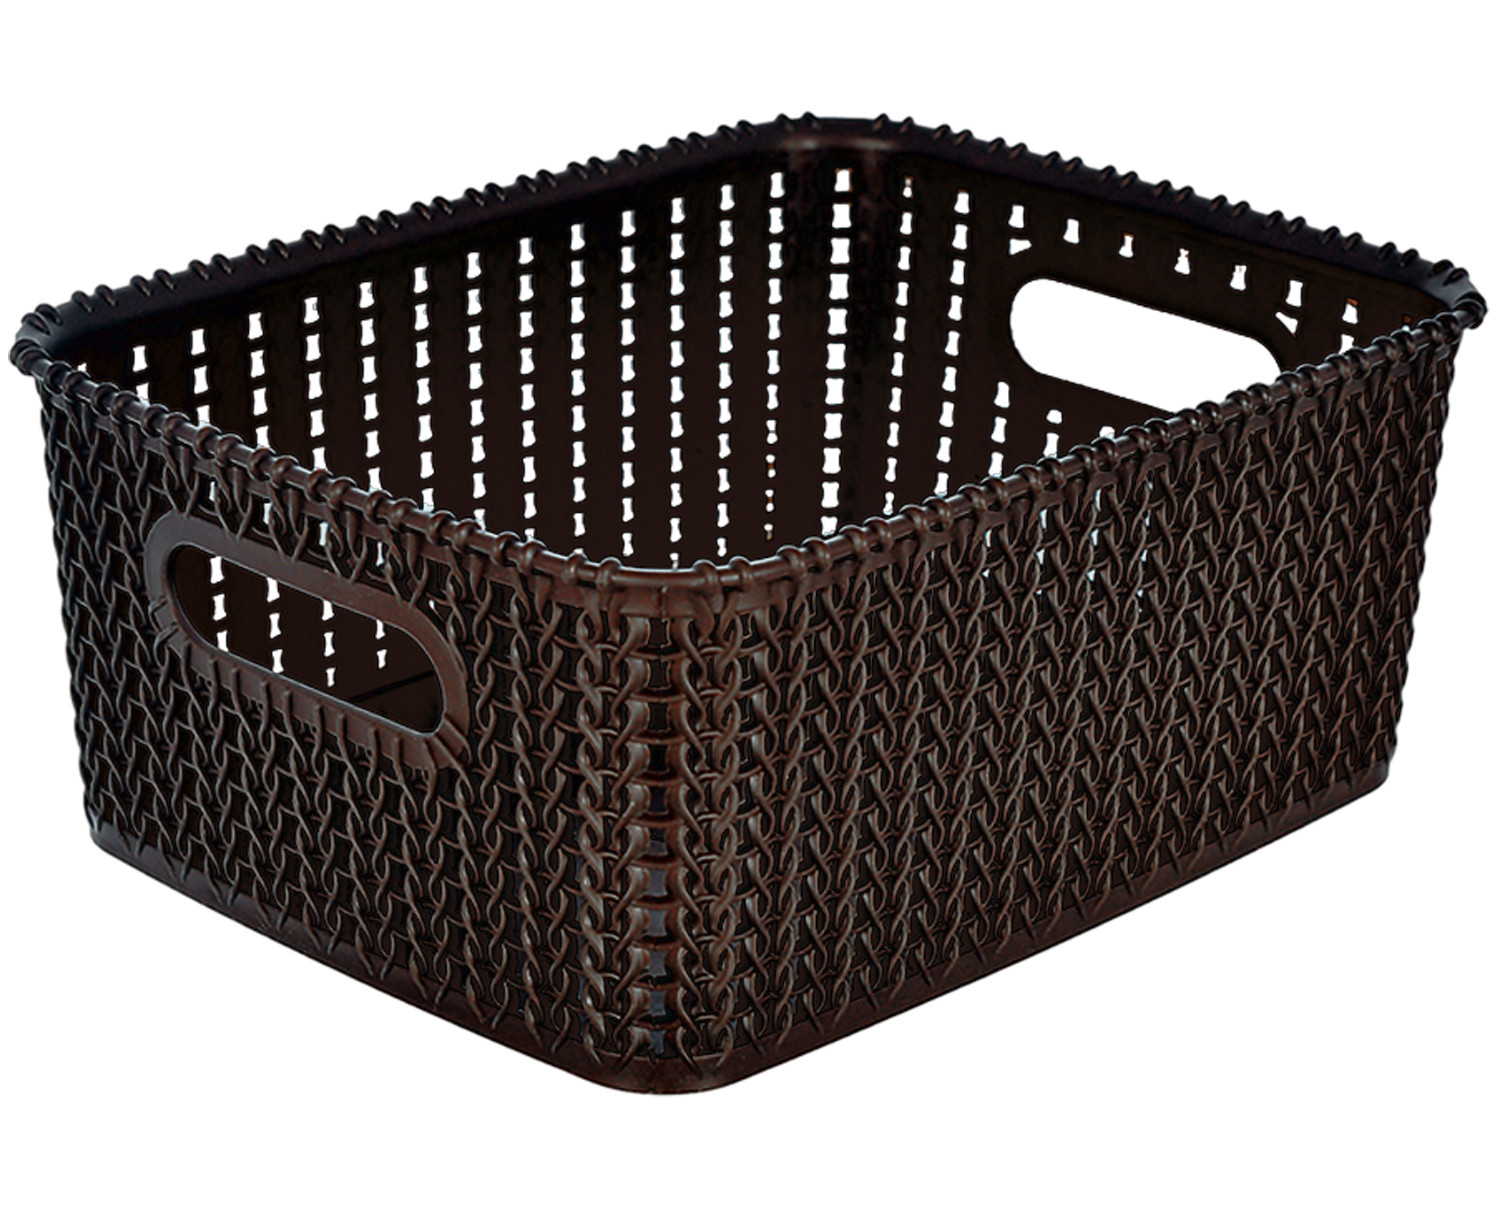 Kuber Industries Multiuses Large & Small Size M 20-15 Plastic Basket/Organizer Without Lid-(Brown) -46KM0133